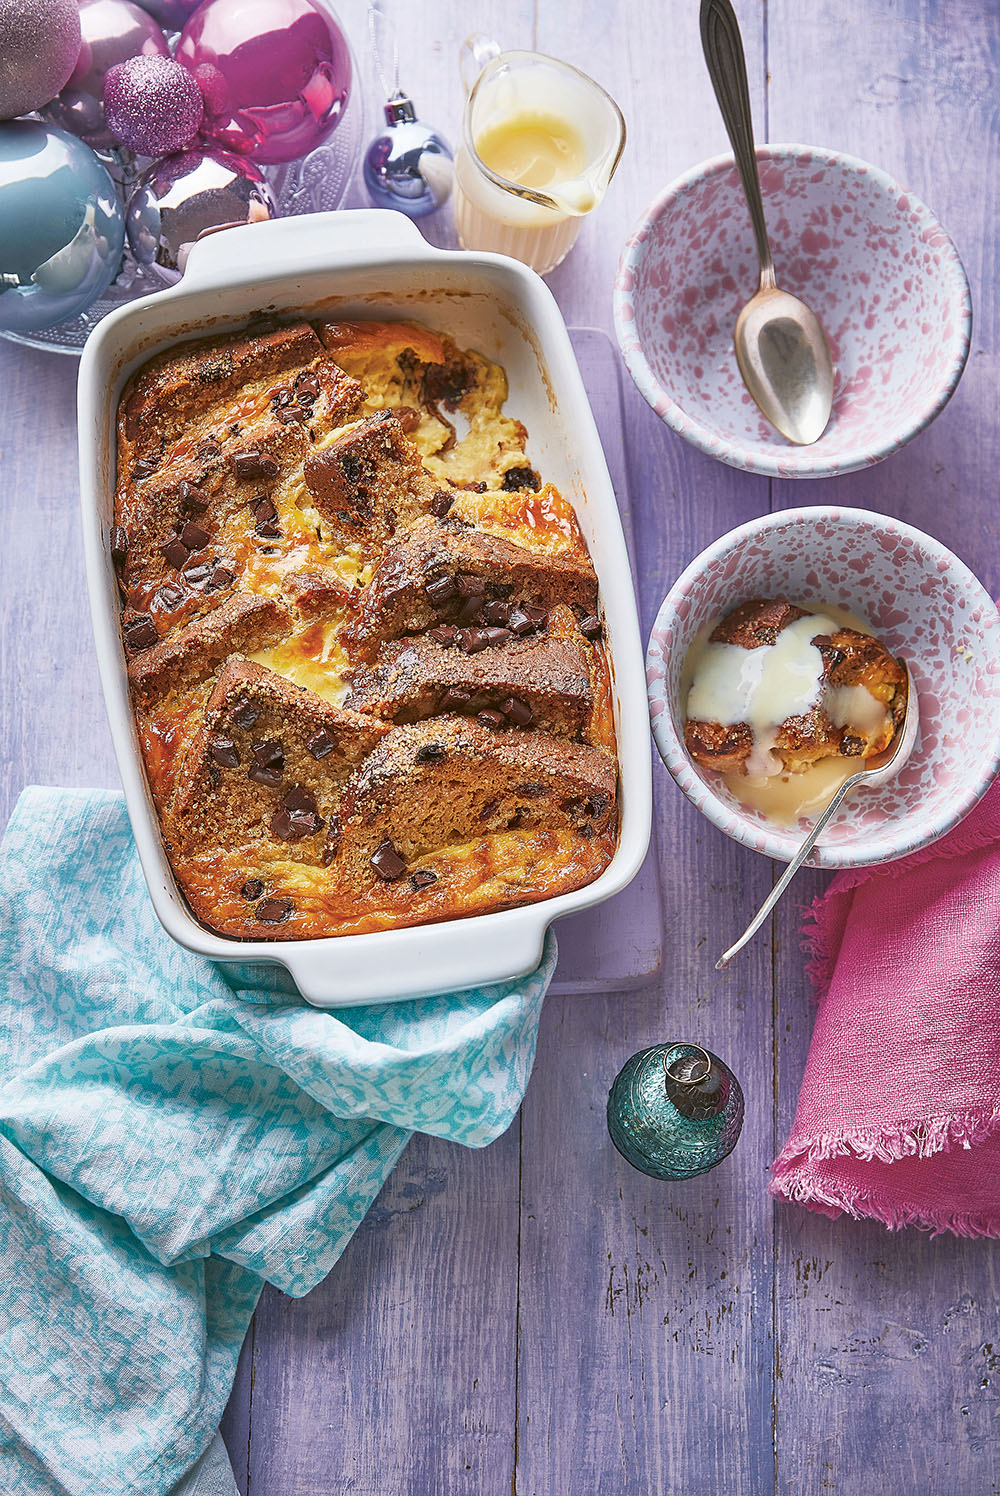 Leftover Panettone Bread and Butter Pudding